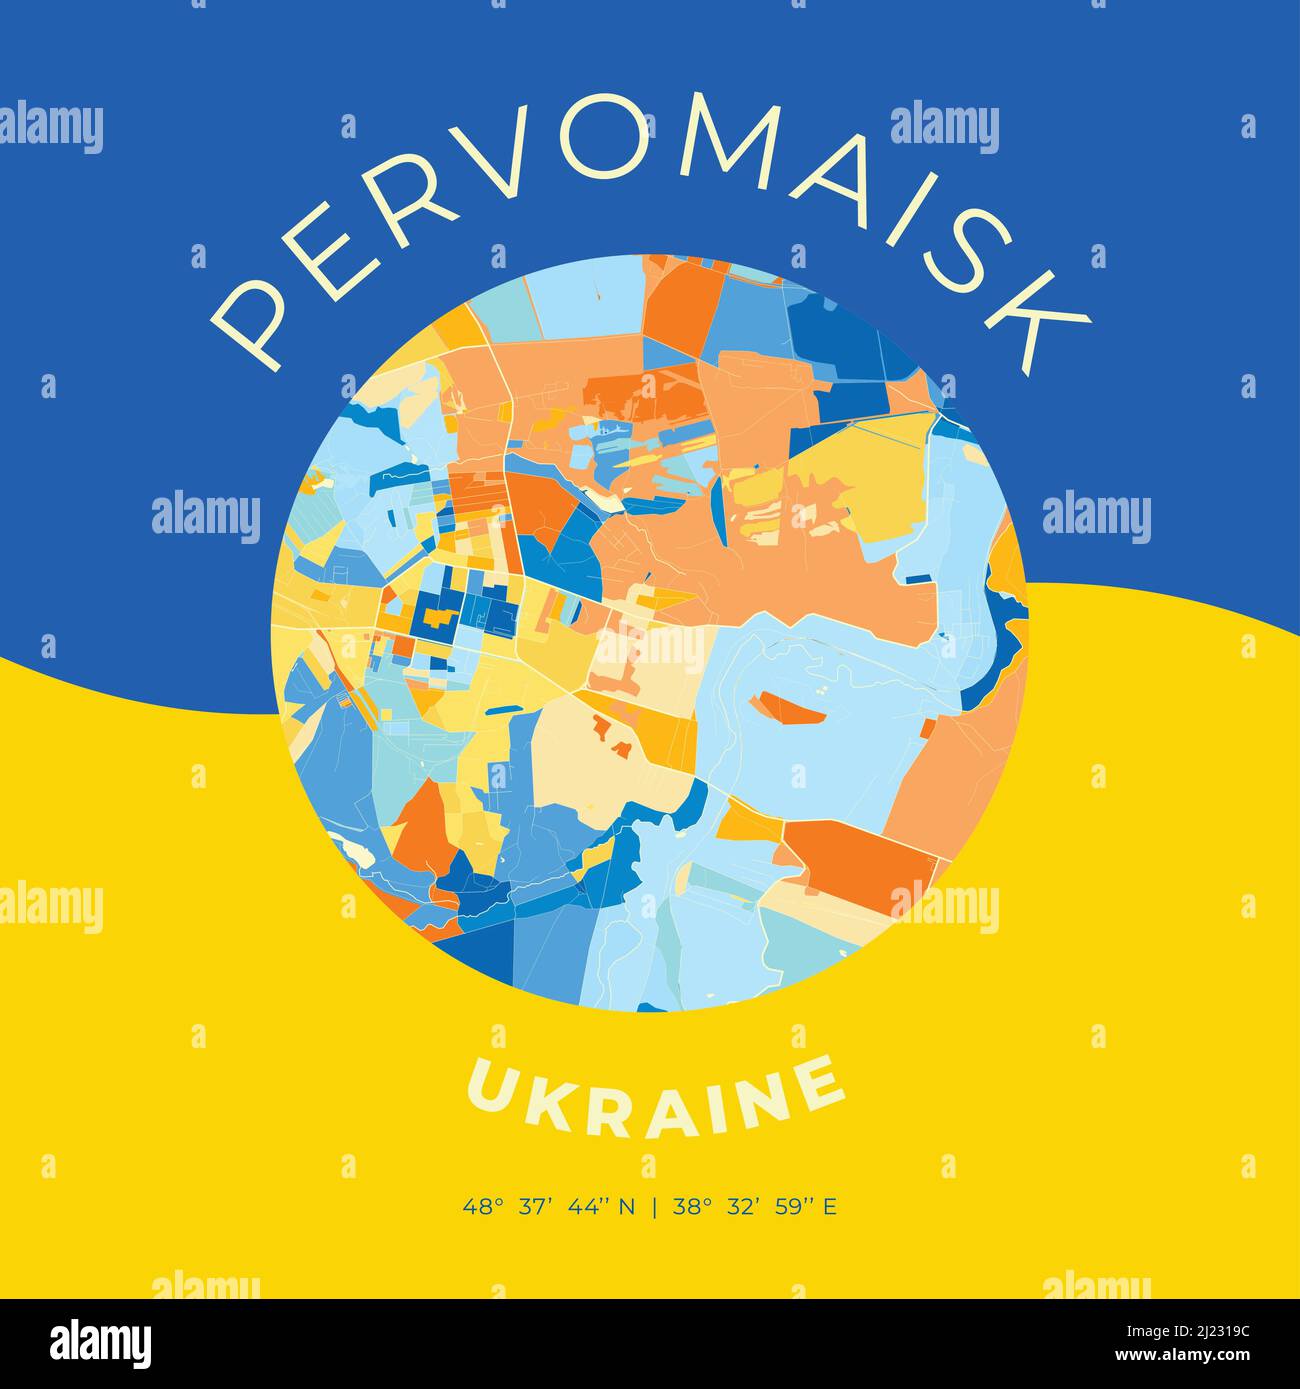 Vector map print template of Pervomaisk, Luhansk Oblast, Ukraine with bright blue, green and yellow colors. The various shades follow a radom principl Stock Vector